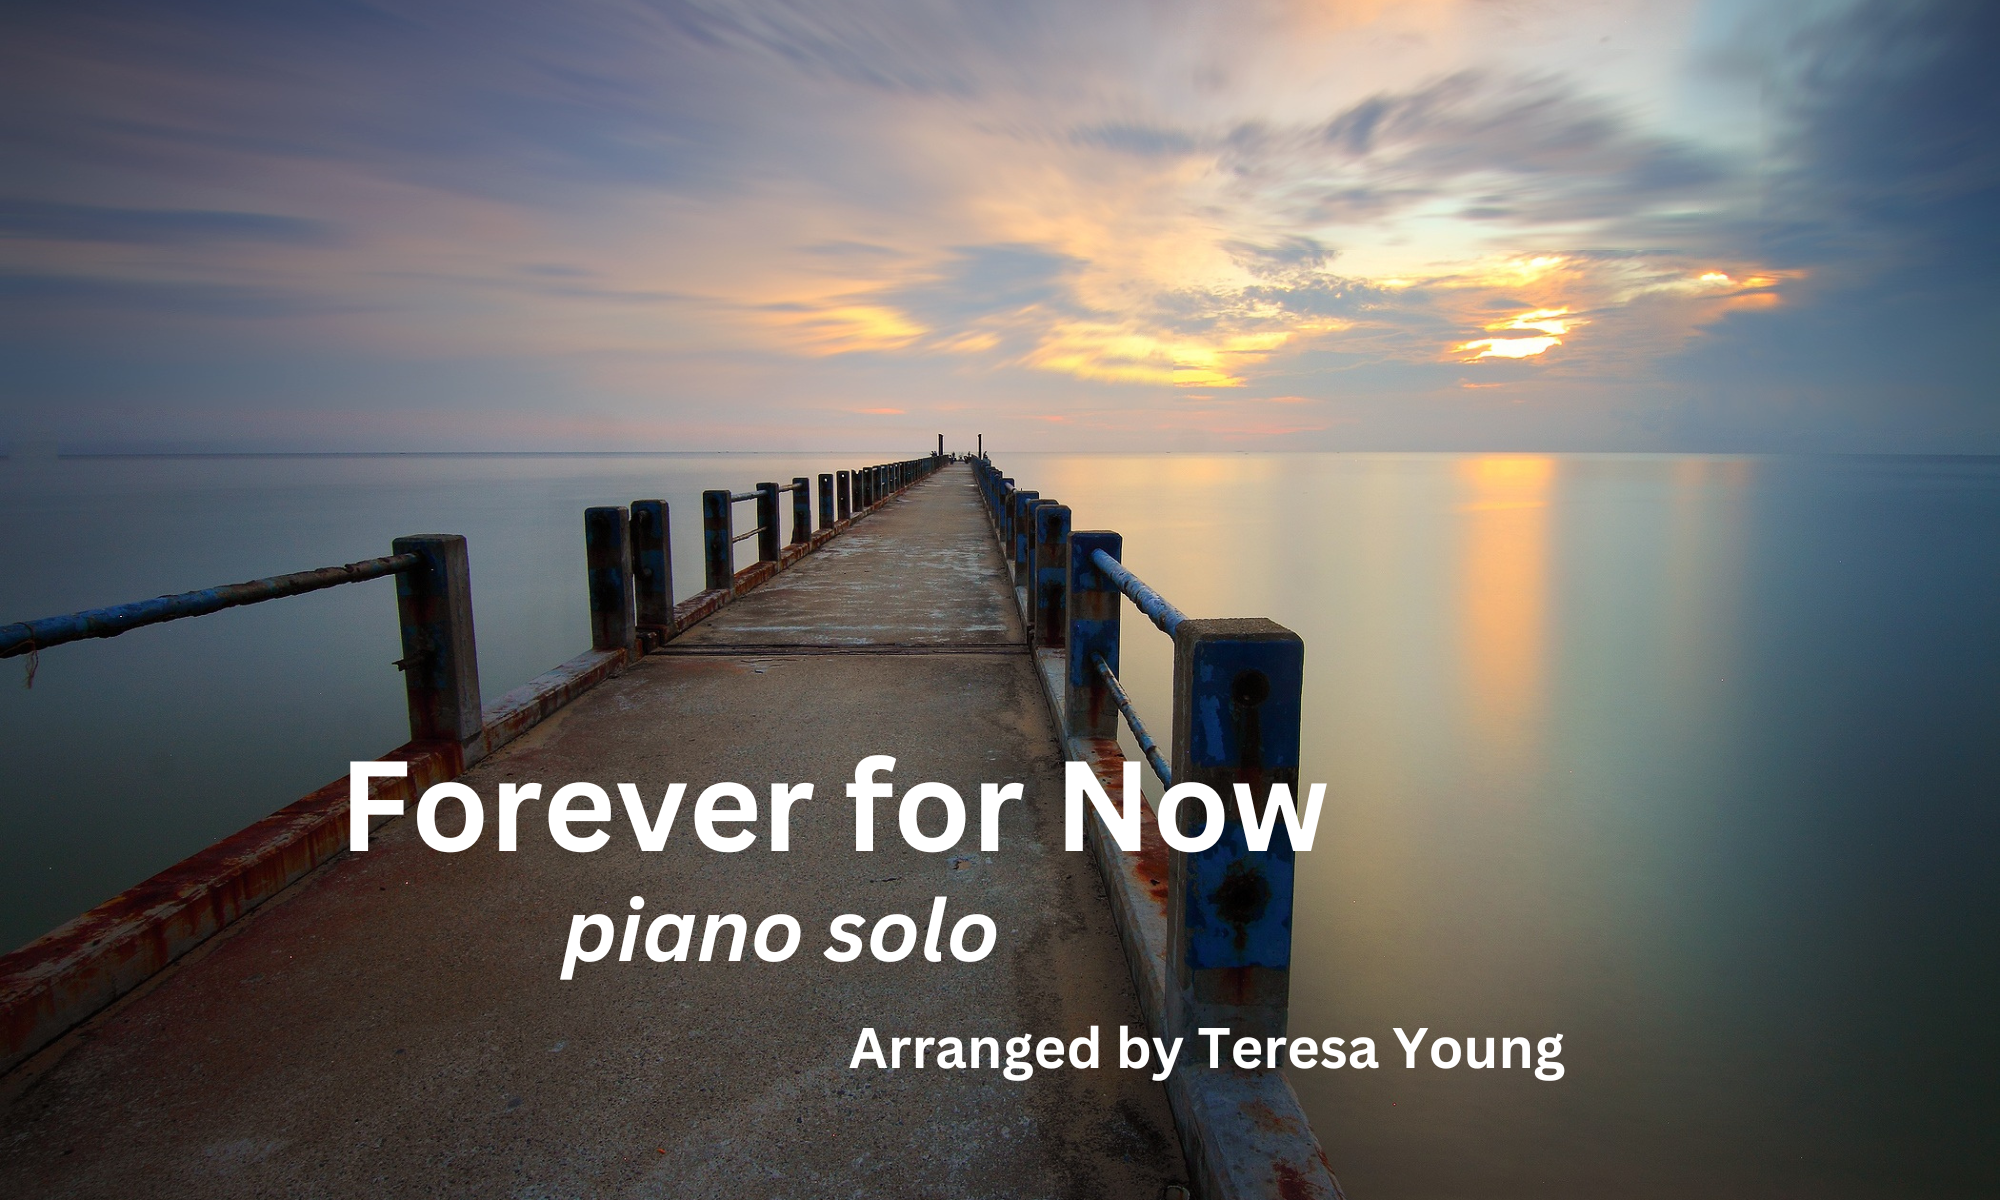 Forever for Now, arr. Teresa Young